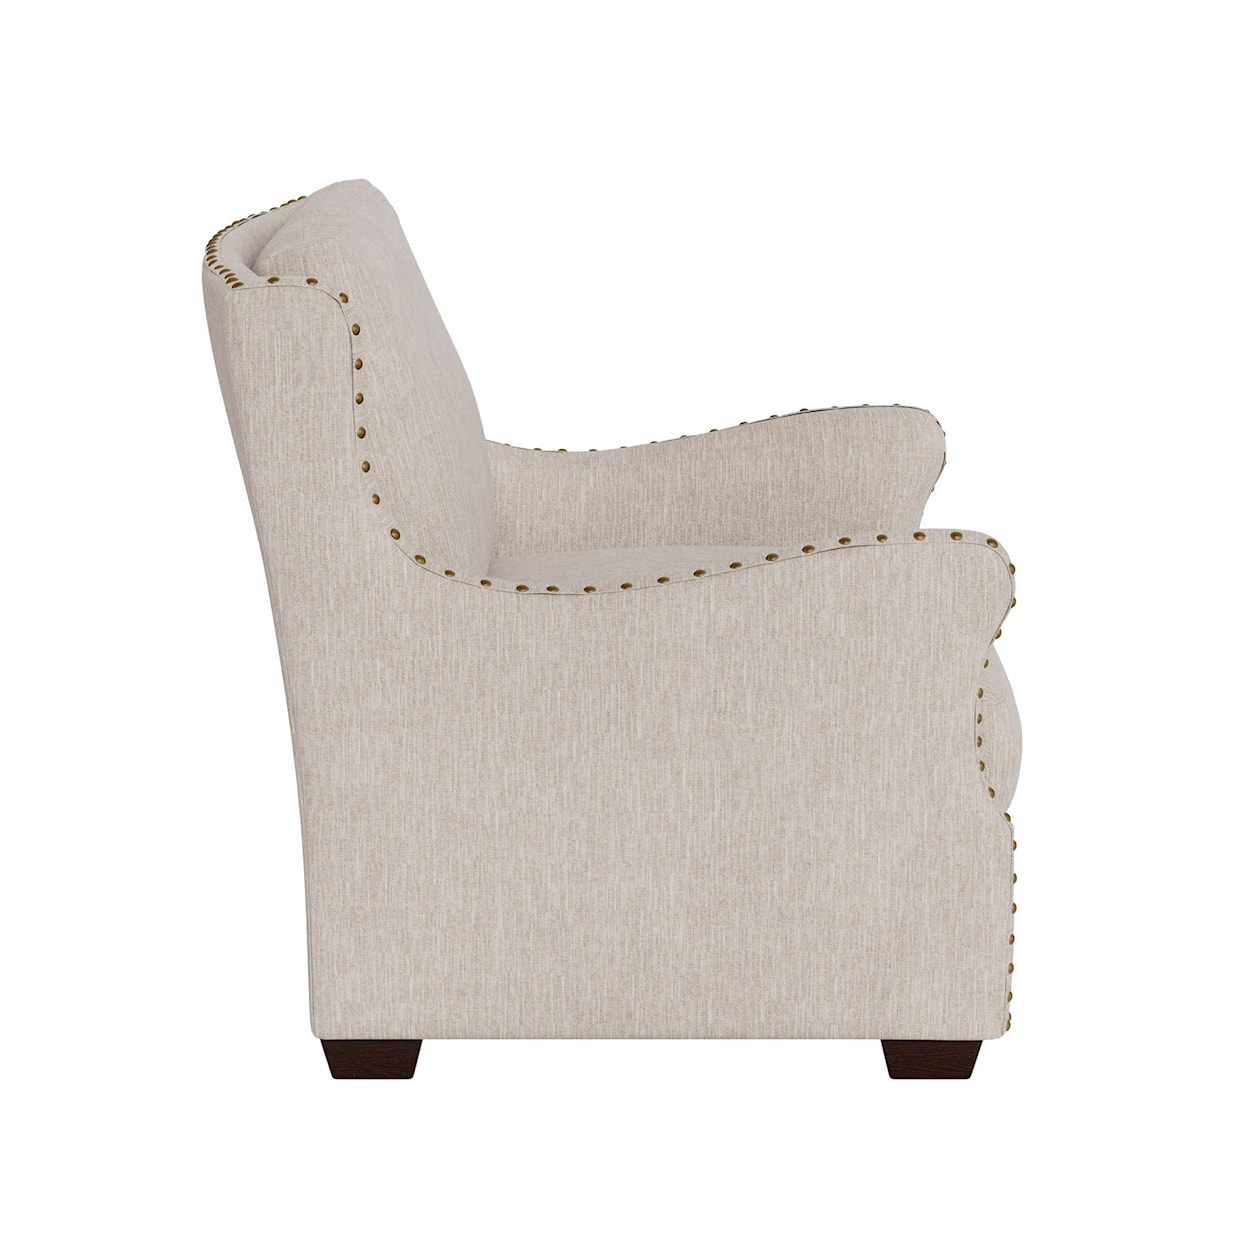 Universal Connor Accent Chair with Nail-Head Trim